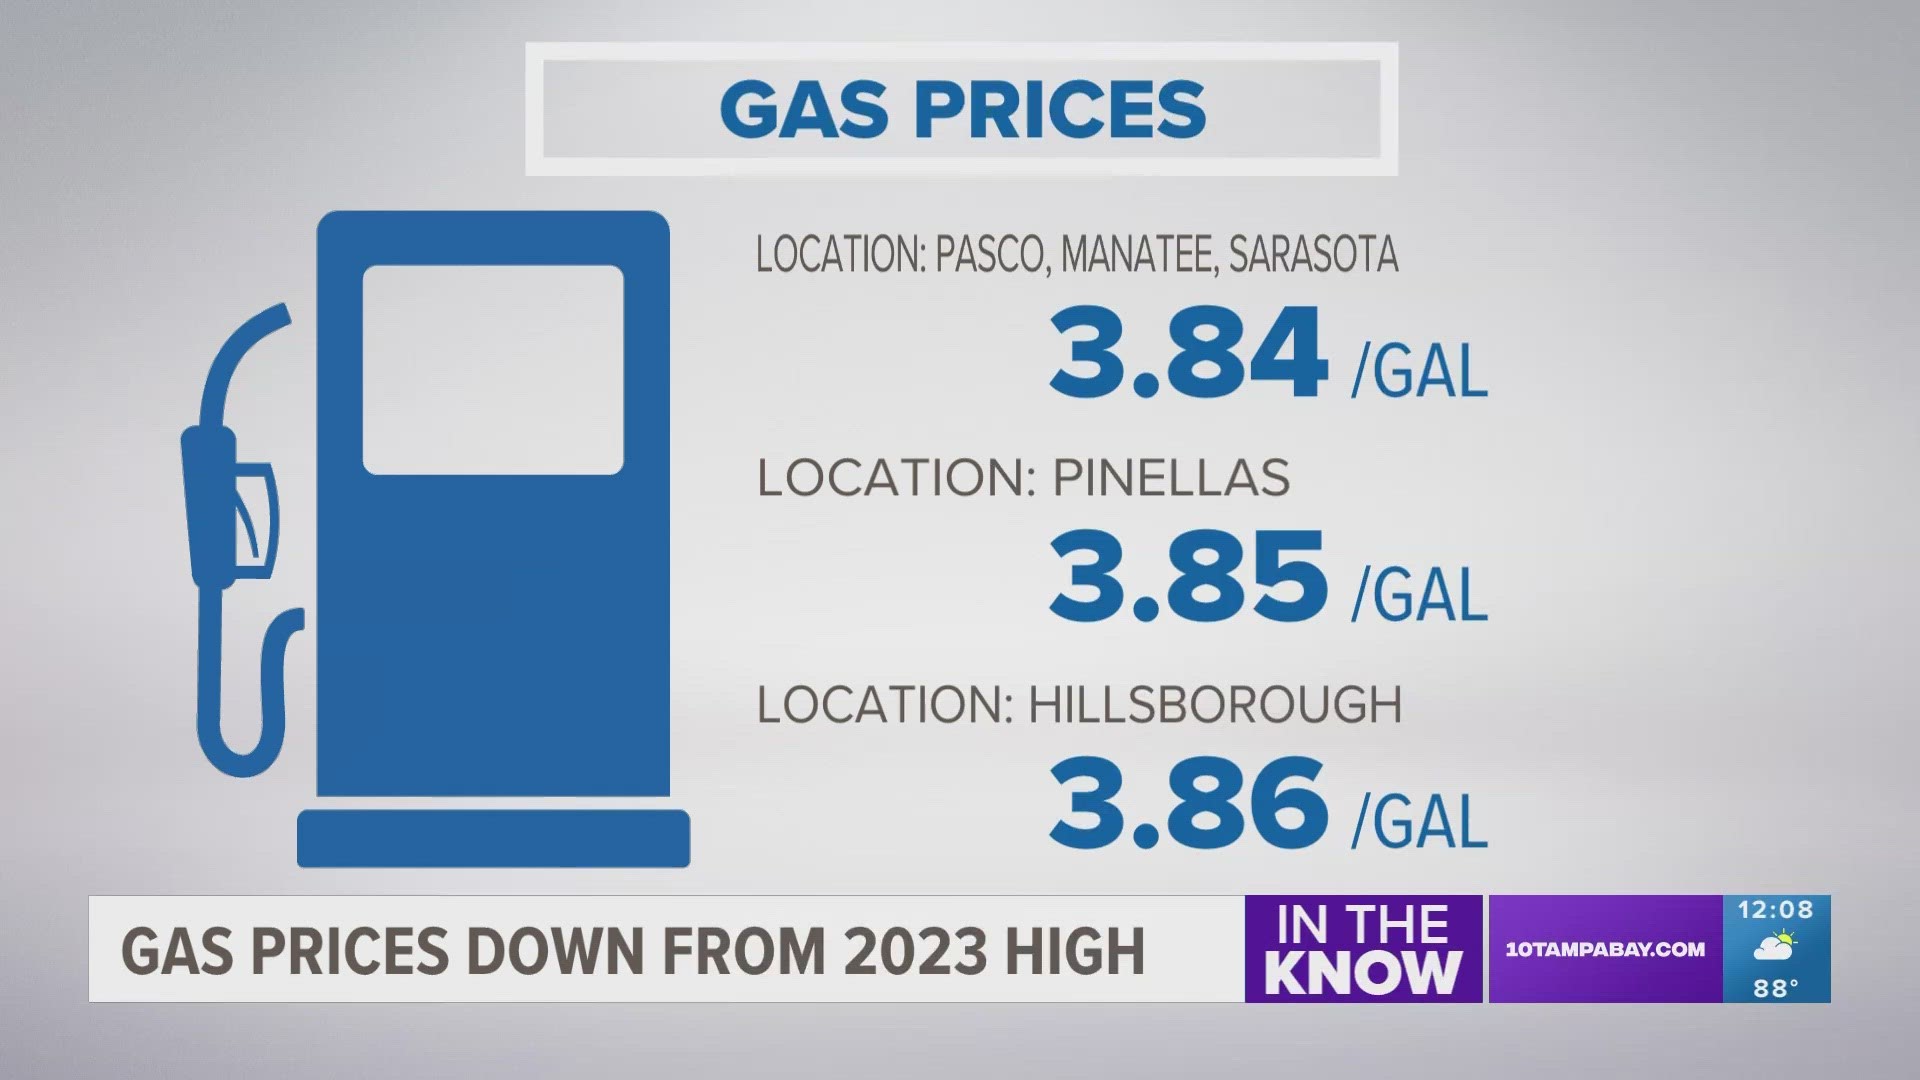 AAA says prices in the Tampa Bay area are a bit higher than the Florida average of $3.84 a gallon.